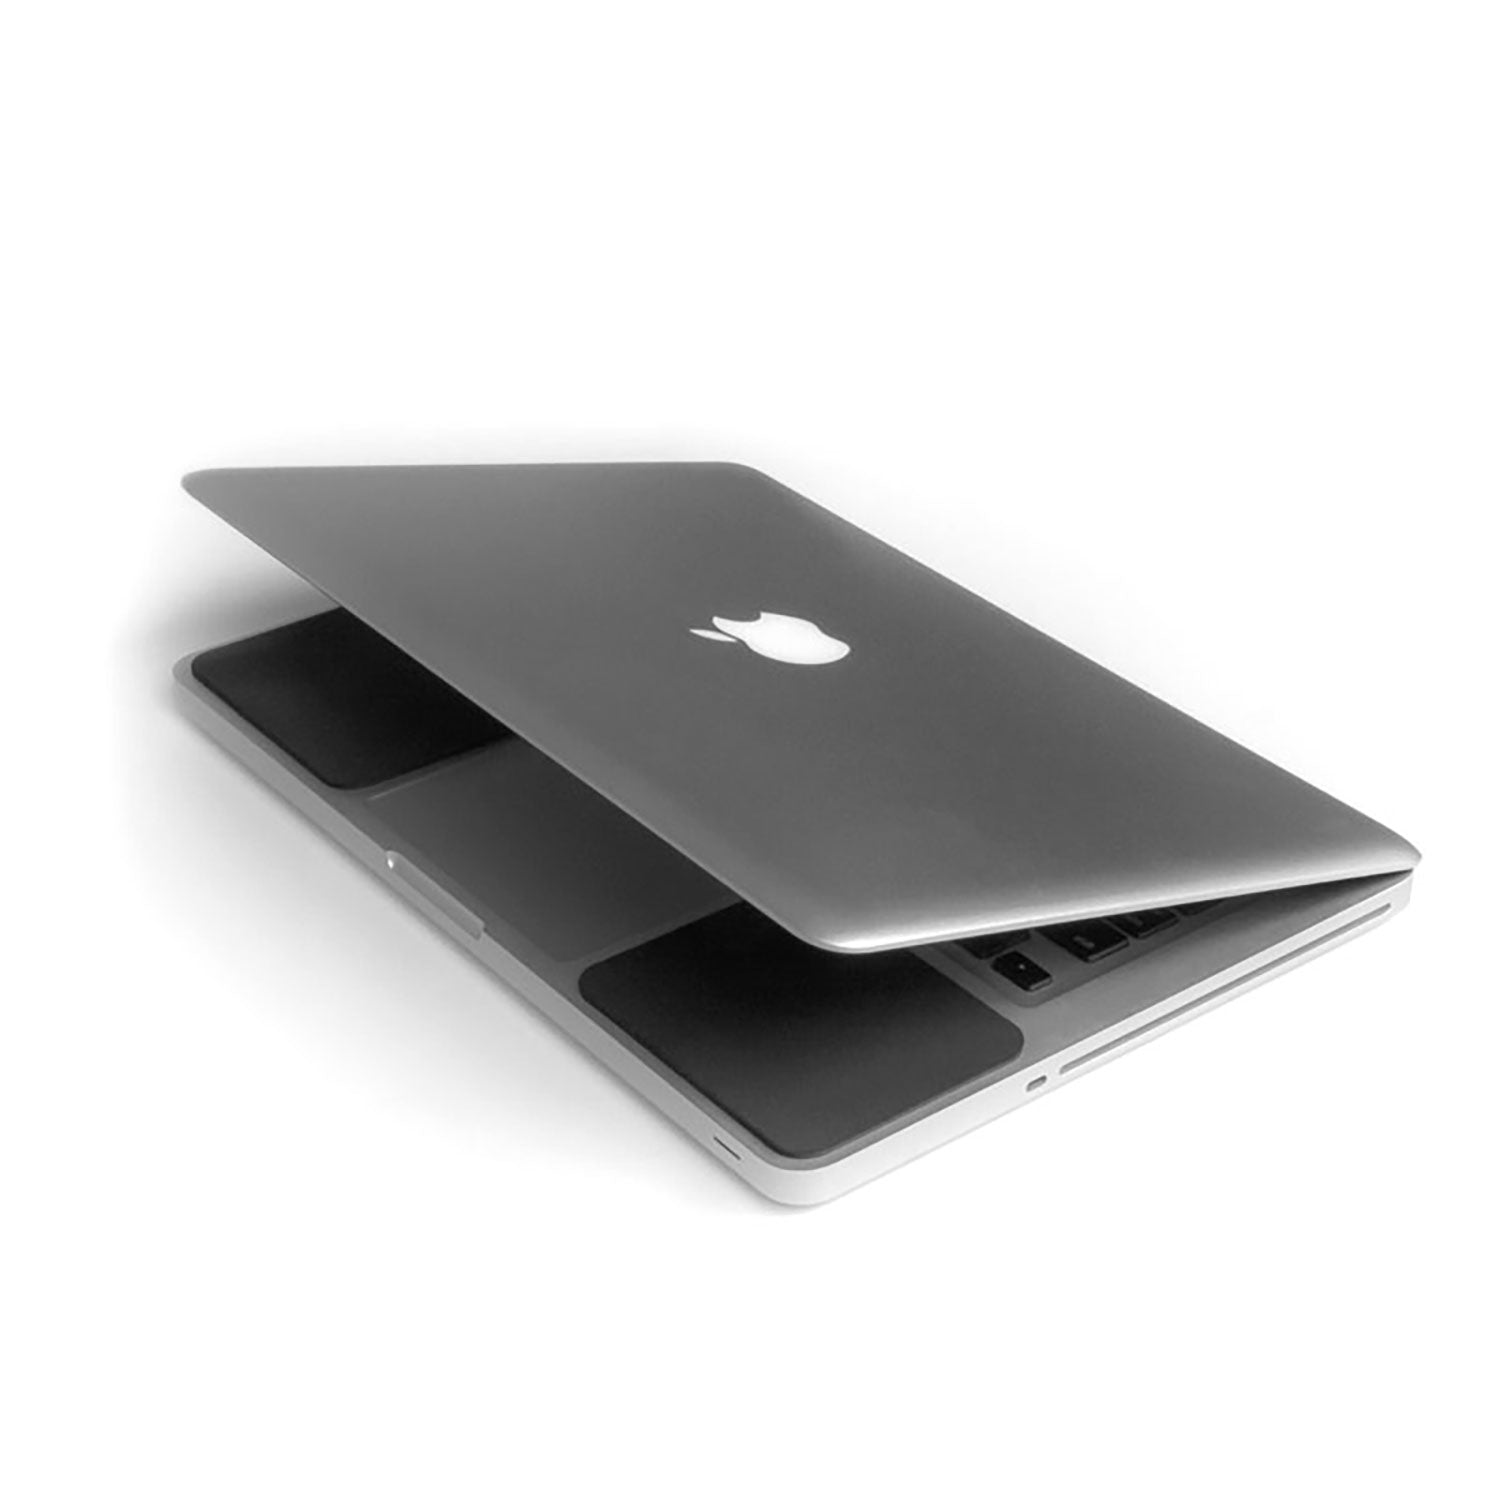 Grifiti Slim Palm Pads Re-positionable Wrist Rests on MacBooks Laptops and Notebooks - Grifiti